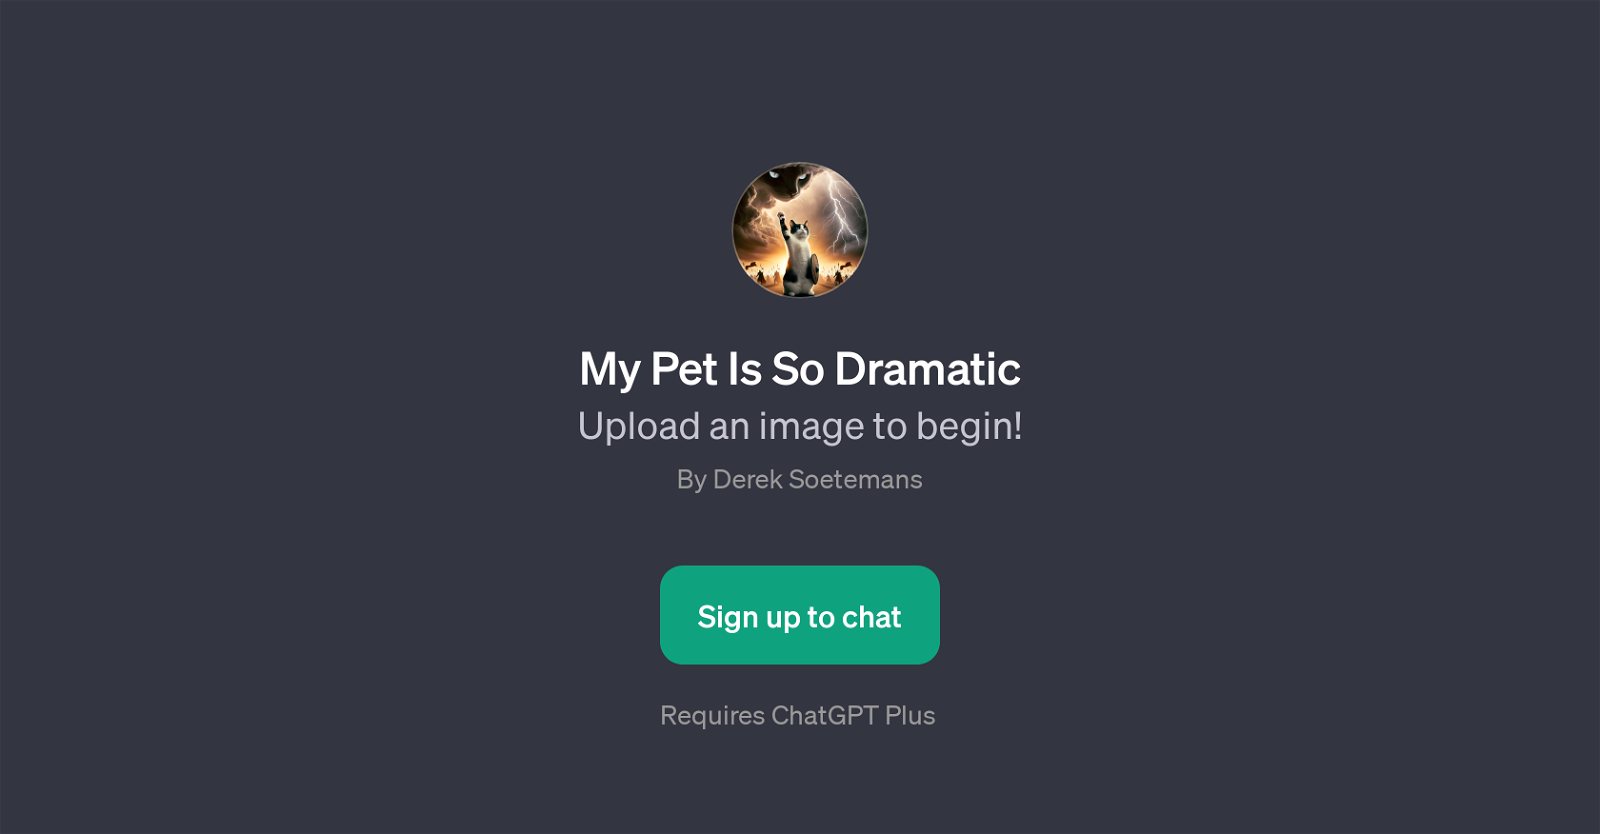 My Pet Is So Dramatic website